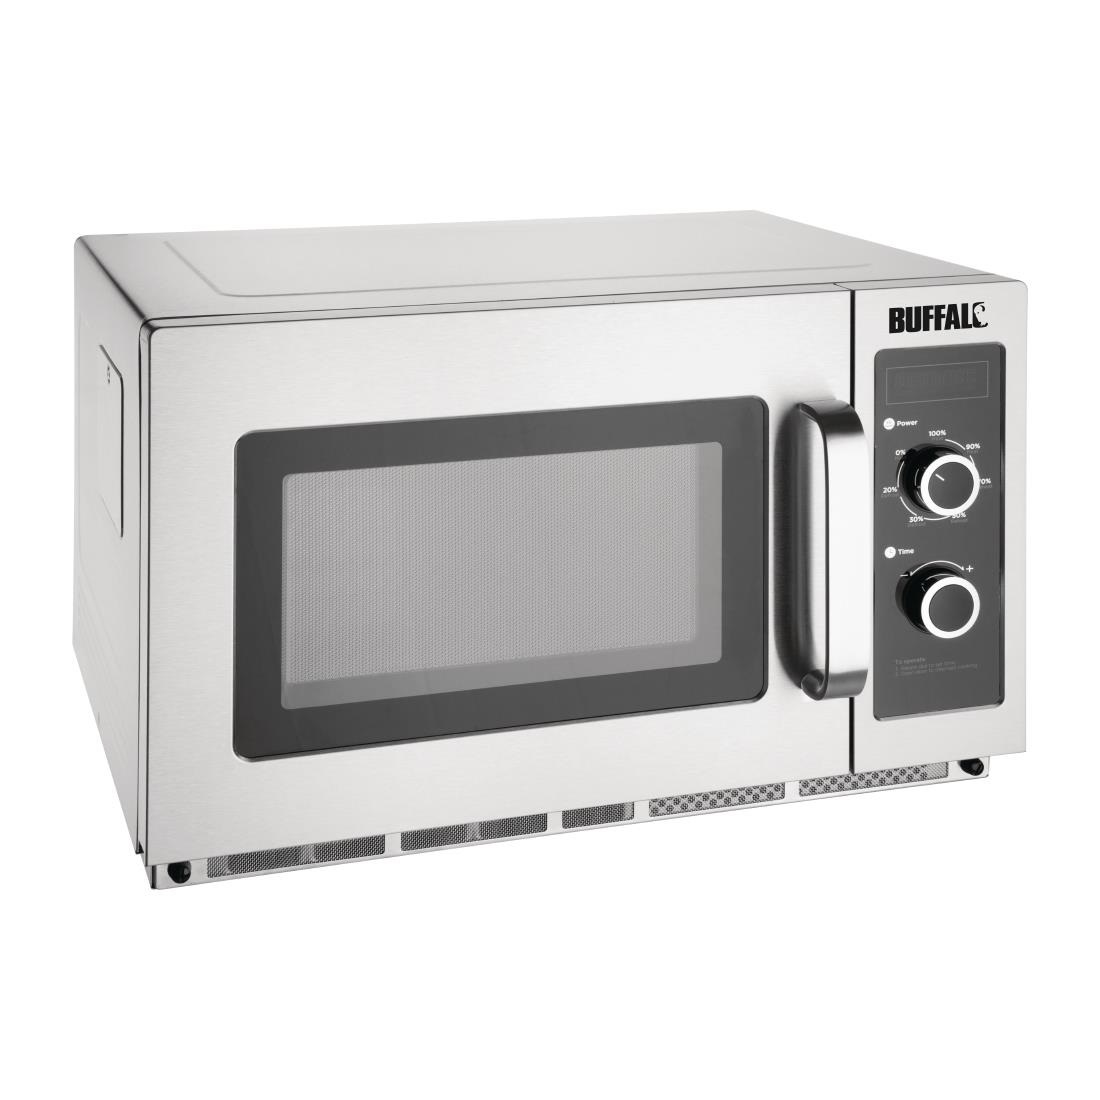 Buffalo Manual Commercial Microwave Oven 1800W (FB863)